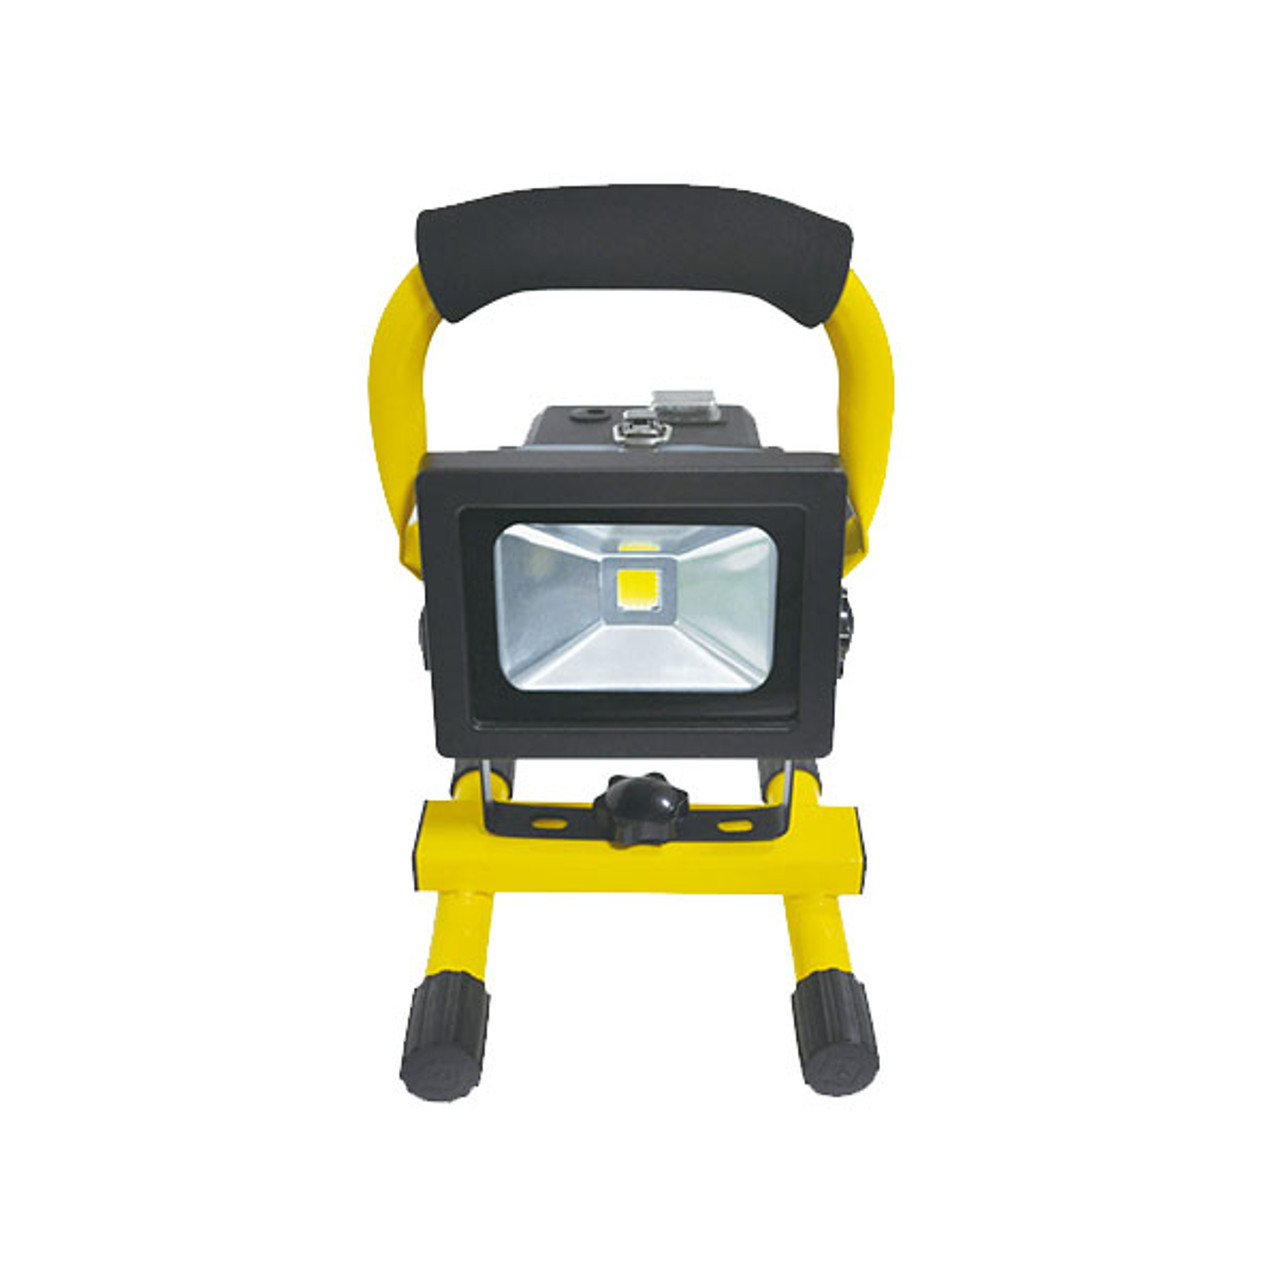 The Trouble Free™ LED Work Light